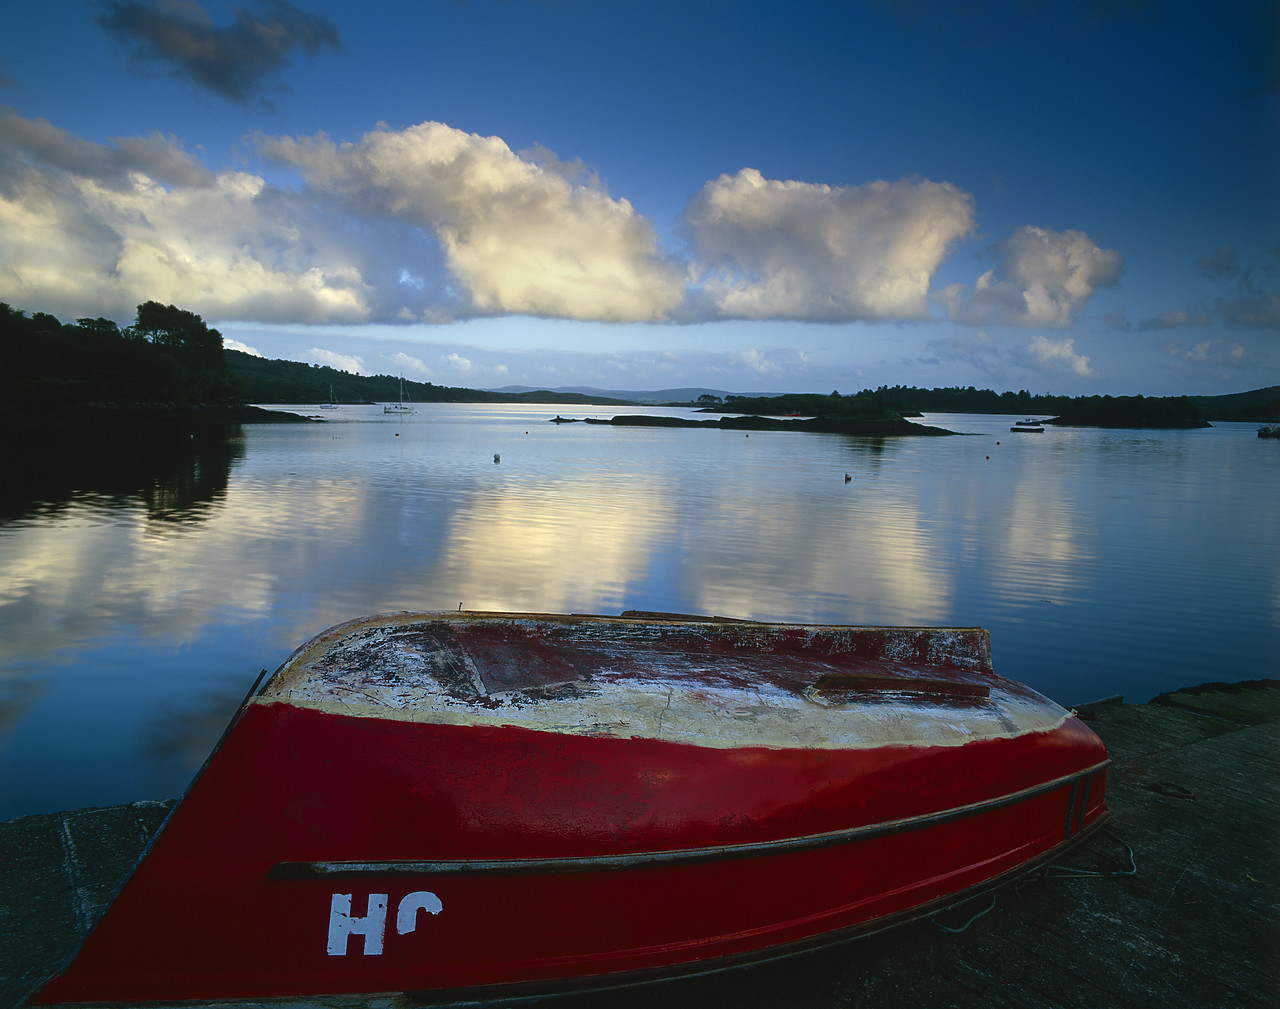 #030256-2 - Red Dinghy, Glengariff Harbour, Co. Cork, Ireland